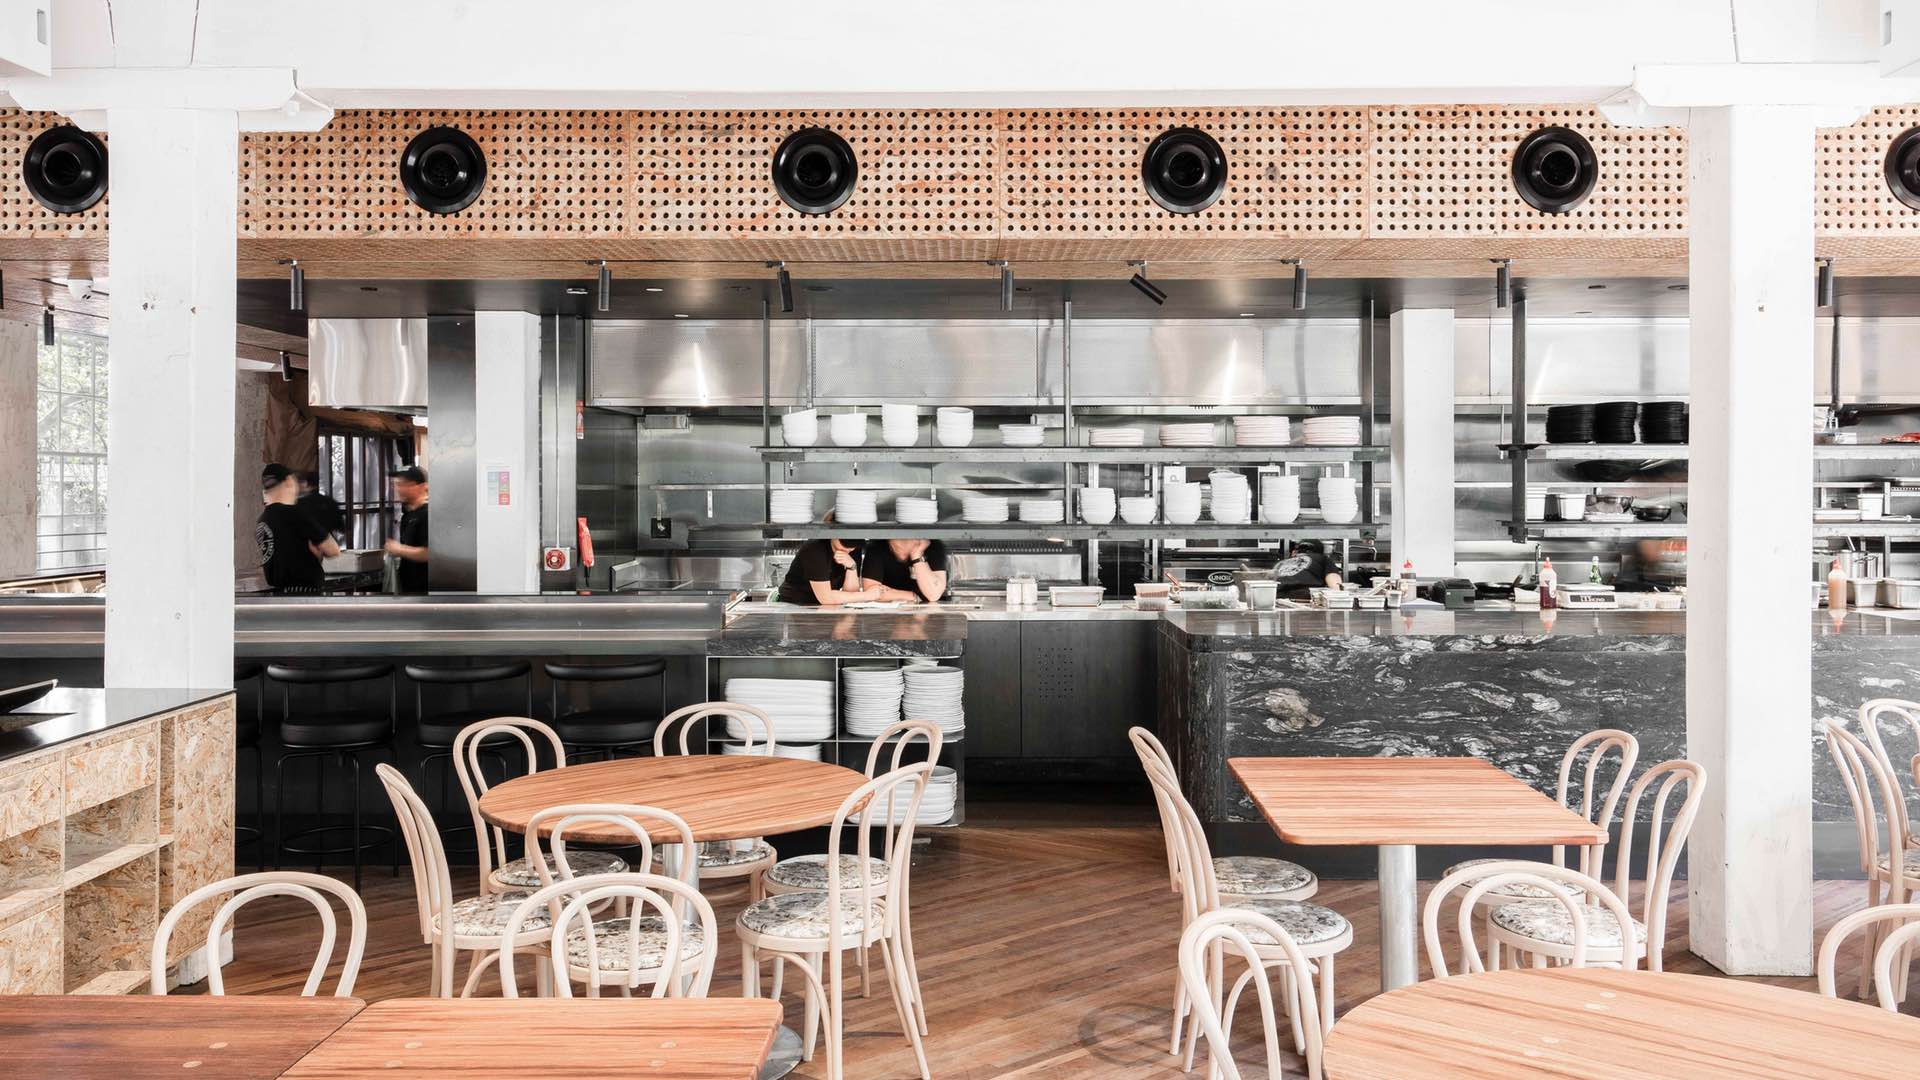 A Look Inside Chin Chin's Highly Anticipated New Sydney Restaurant